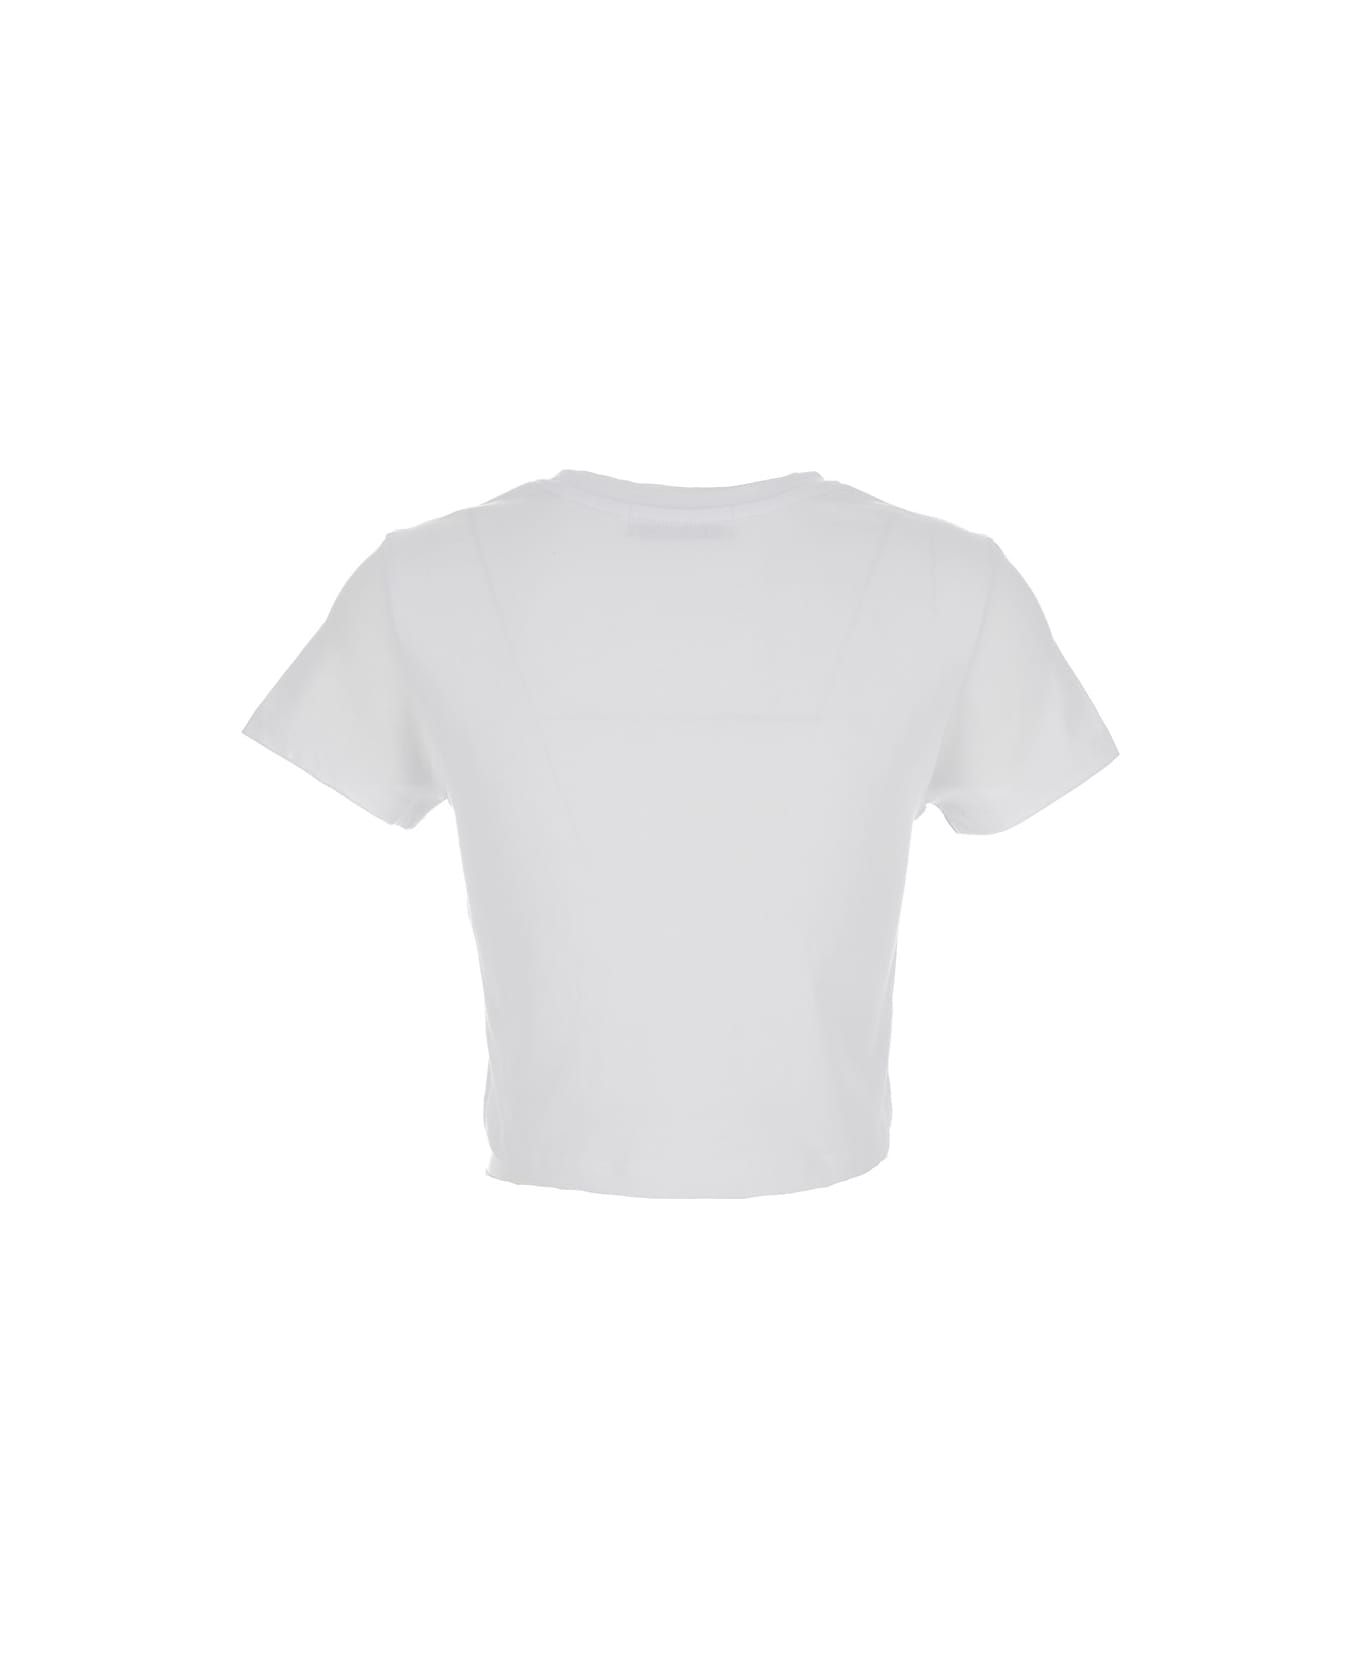 Dunst White Cropped Tee In White Cotton Woman - White Tシャツ